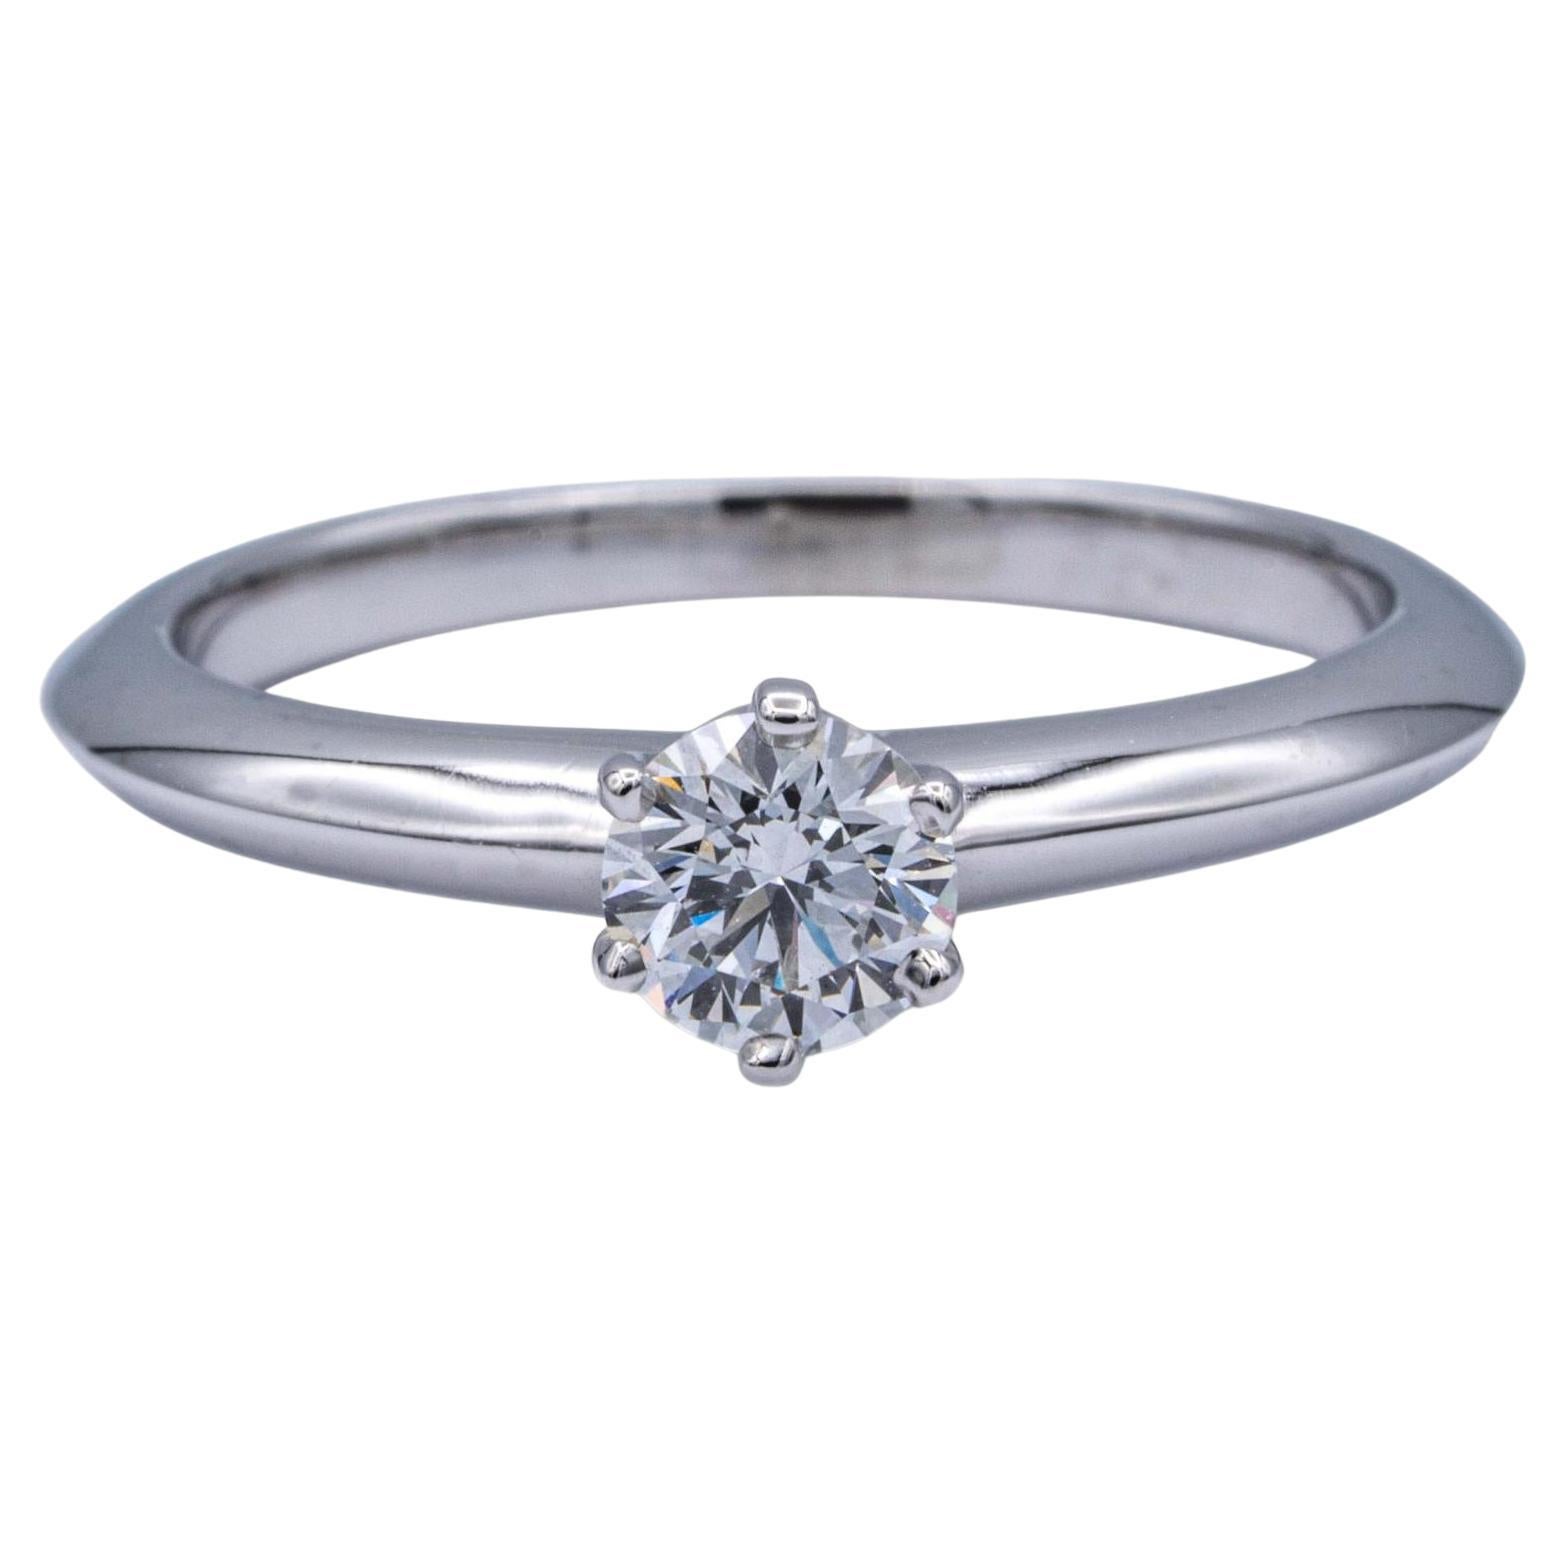 Tiffany & Co. Platinum Solitaire Diamond Engagement Ring with Round 0.30 FVS1